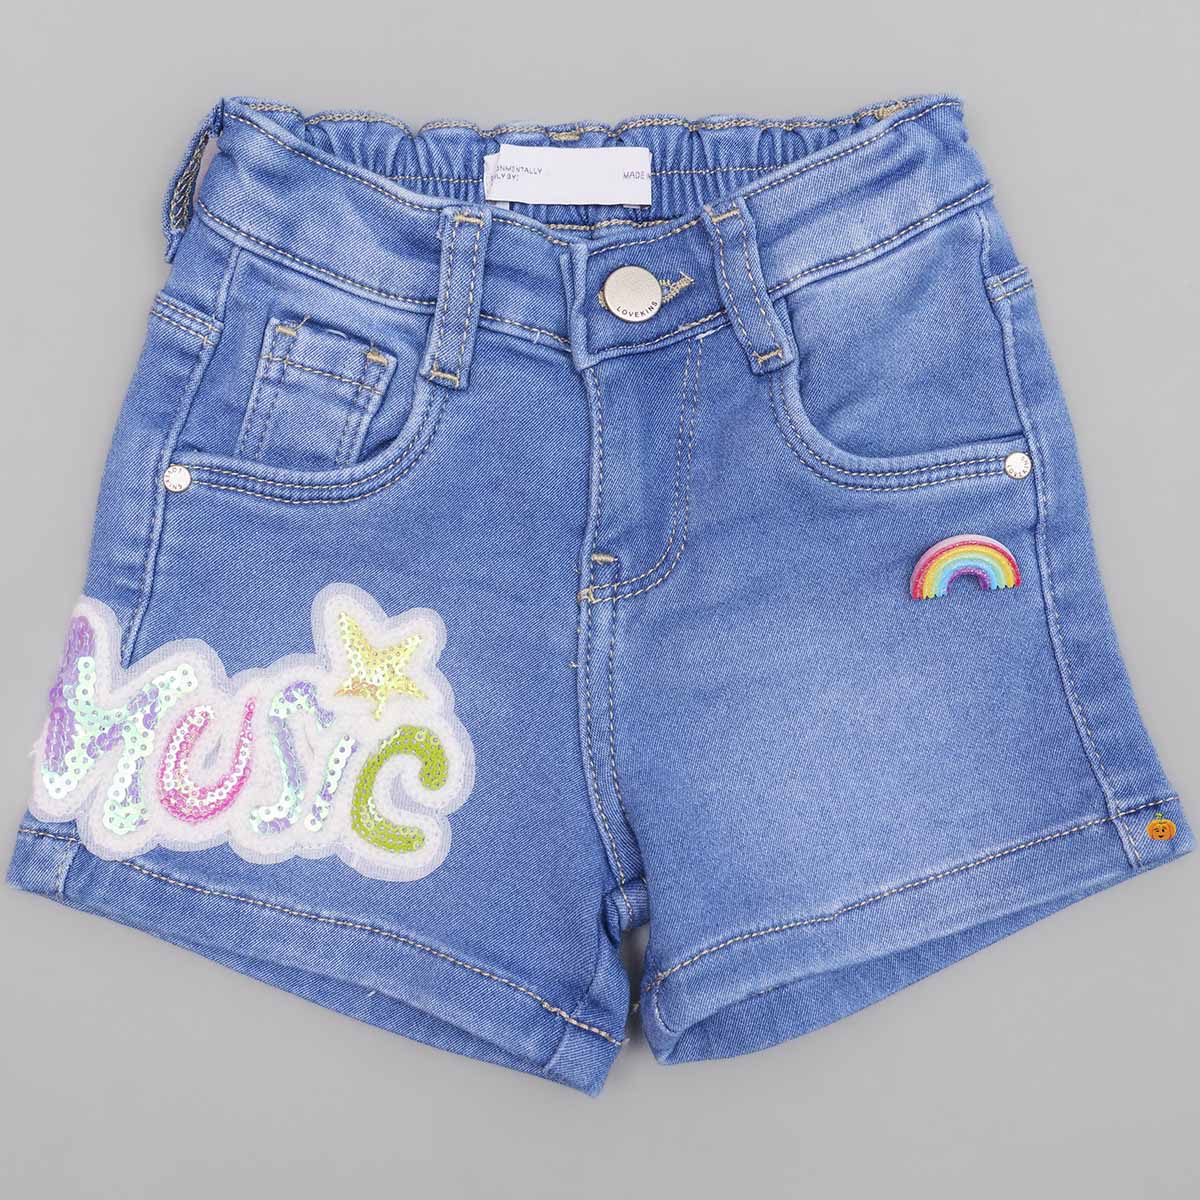 Buy Blue Hot Pants Online  1599 from ShopClues